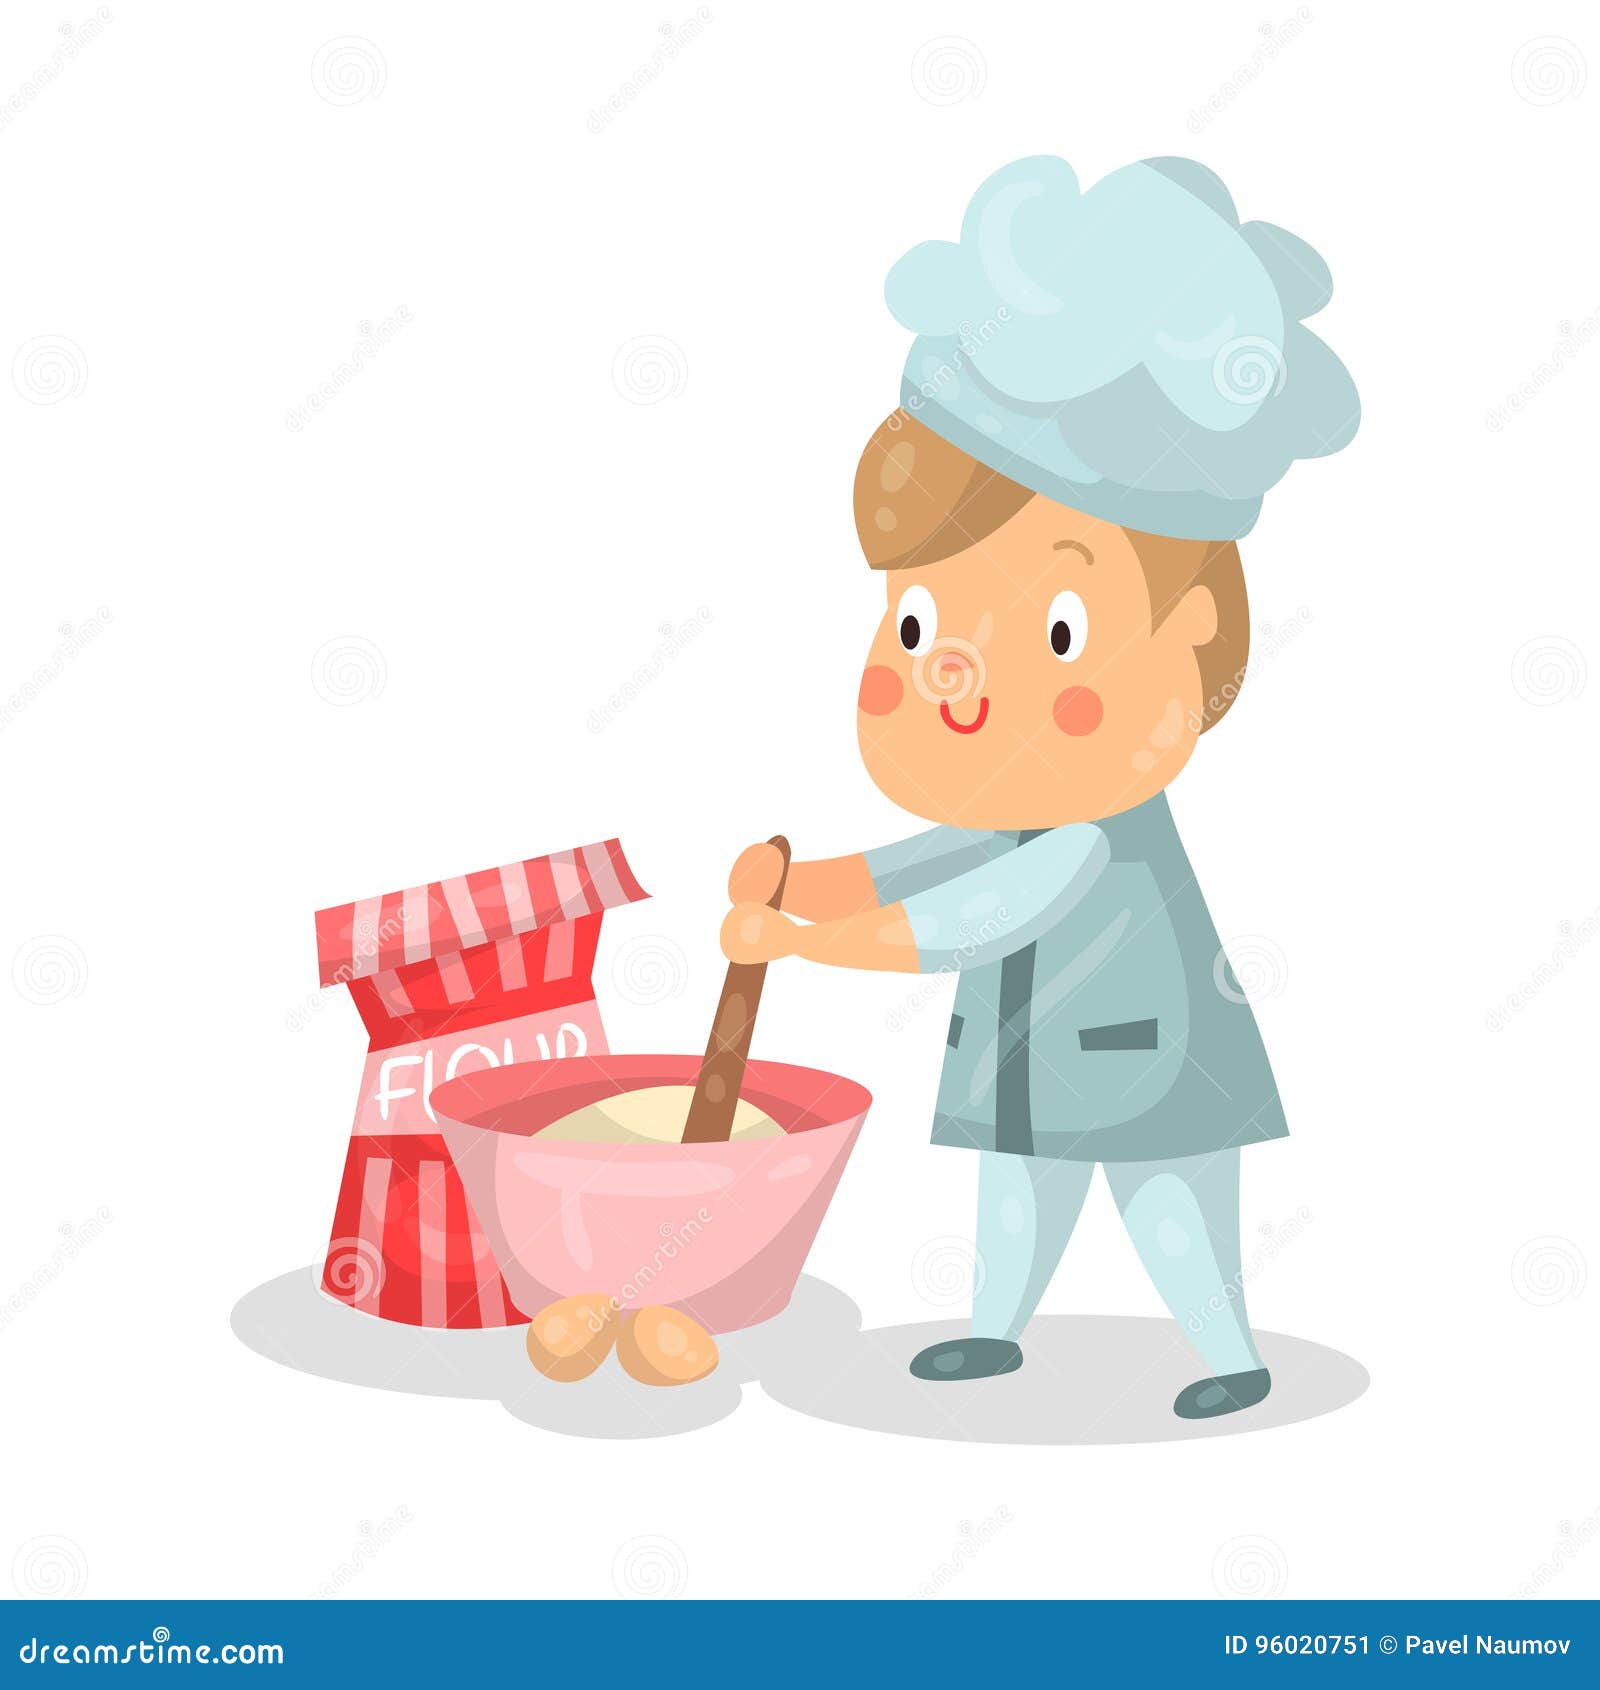 https://thumbs.dreamstime.com/z/cute-cartoon-little-boy-chef-character-mixing-bowl-whisk-illustration-cute-cartoon-little-boy-chef-character-96020751.jpg